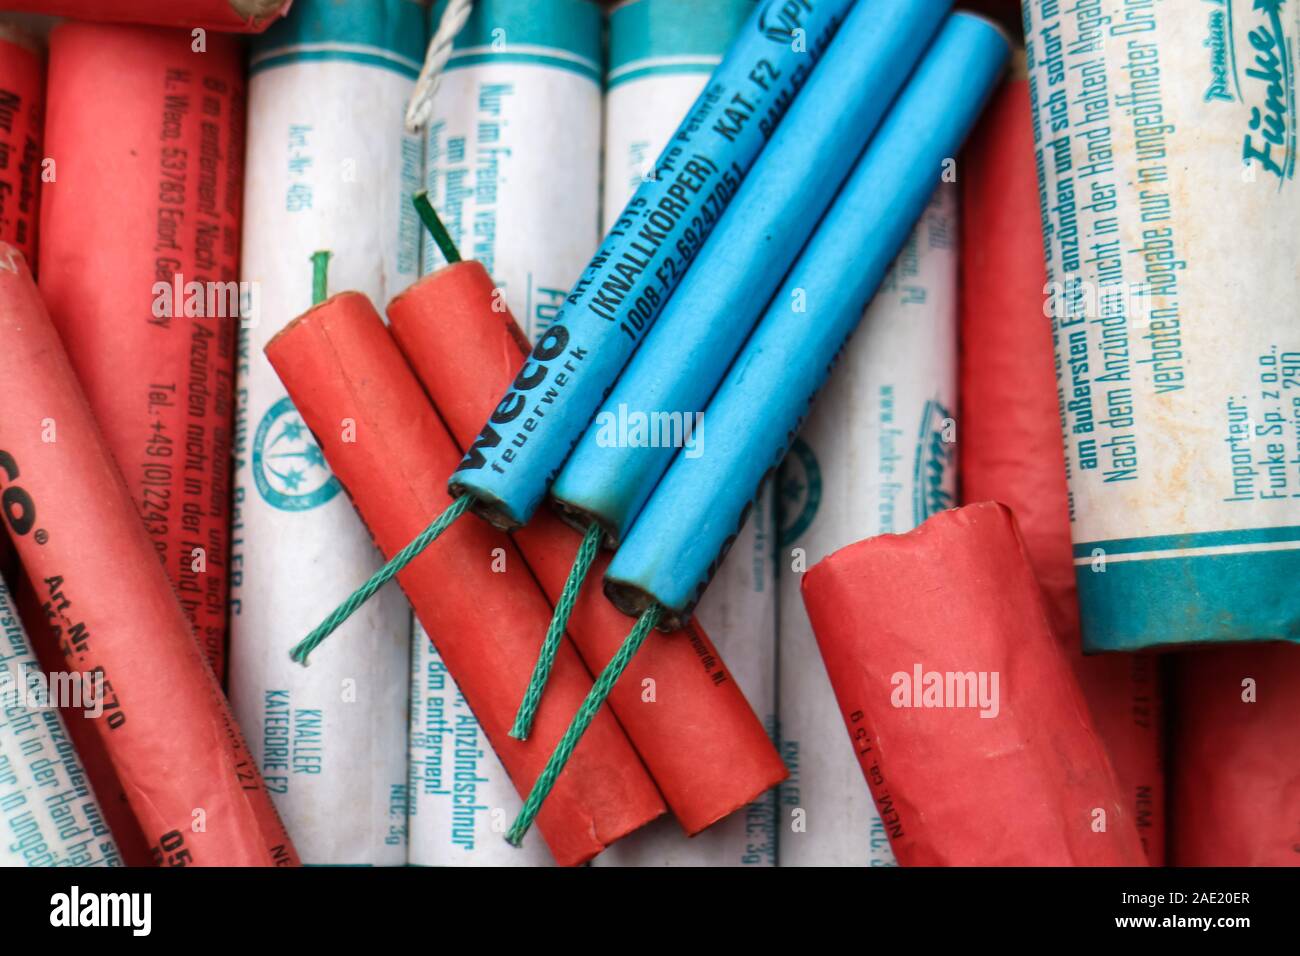 Berlin, Germany - December 2, 2019: A pile of firecrackers ('Böller') from the German fireworks market, including popular retro firecrackers. Stock Photo